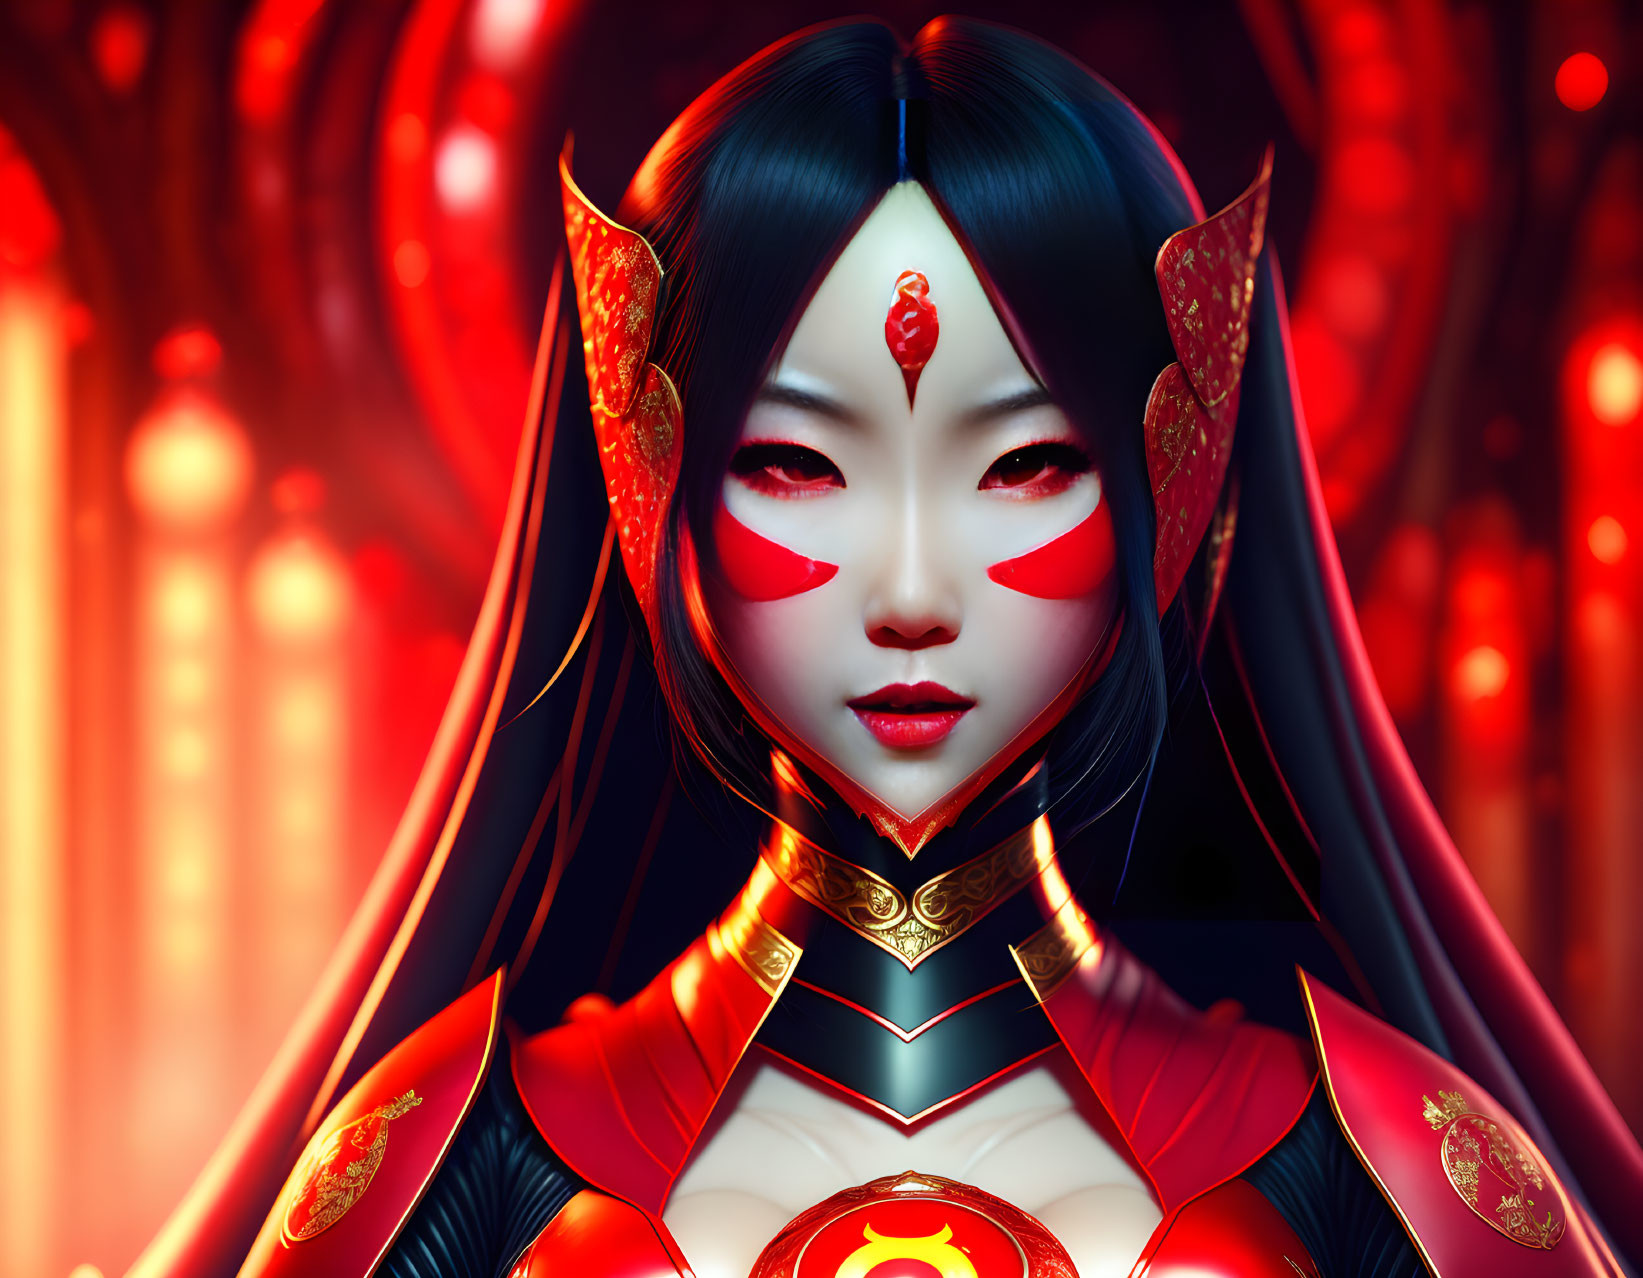 A Famous Anime Red Lantern Woman by DC